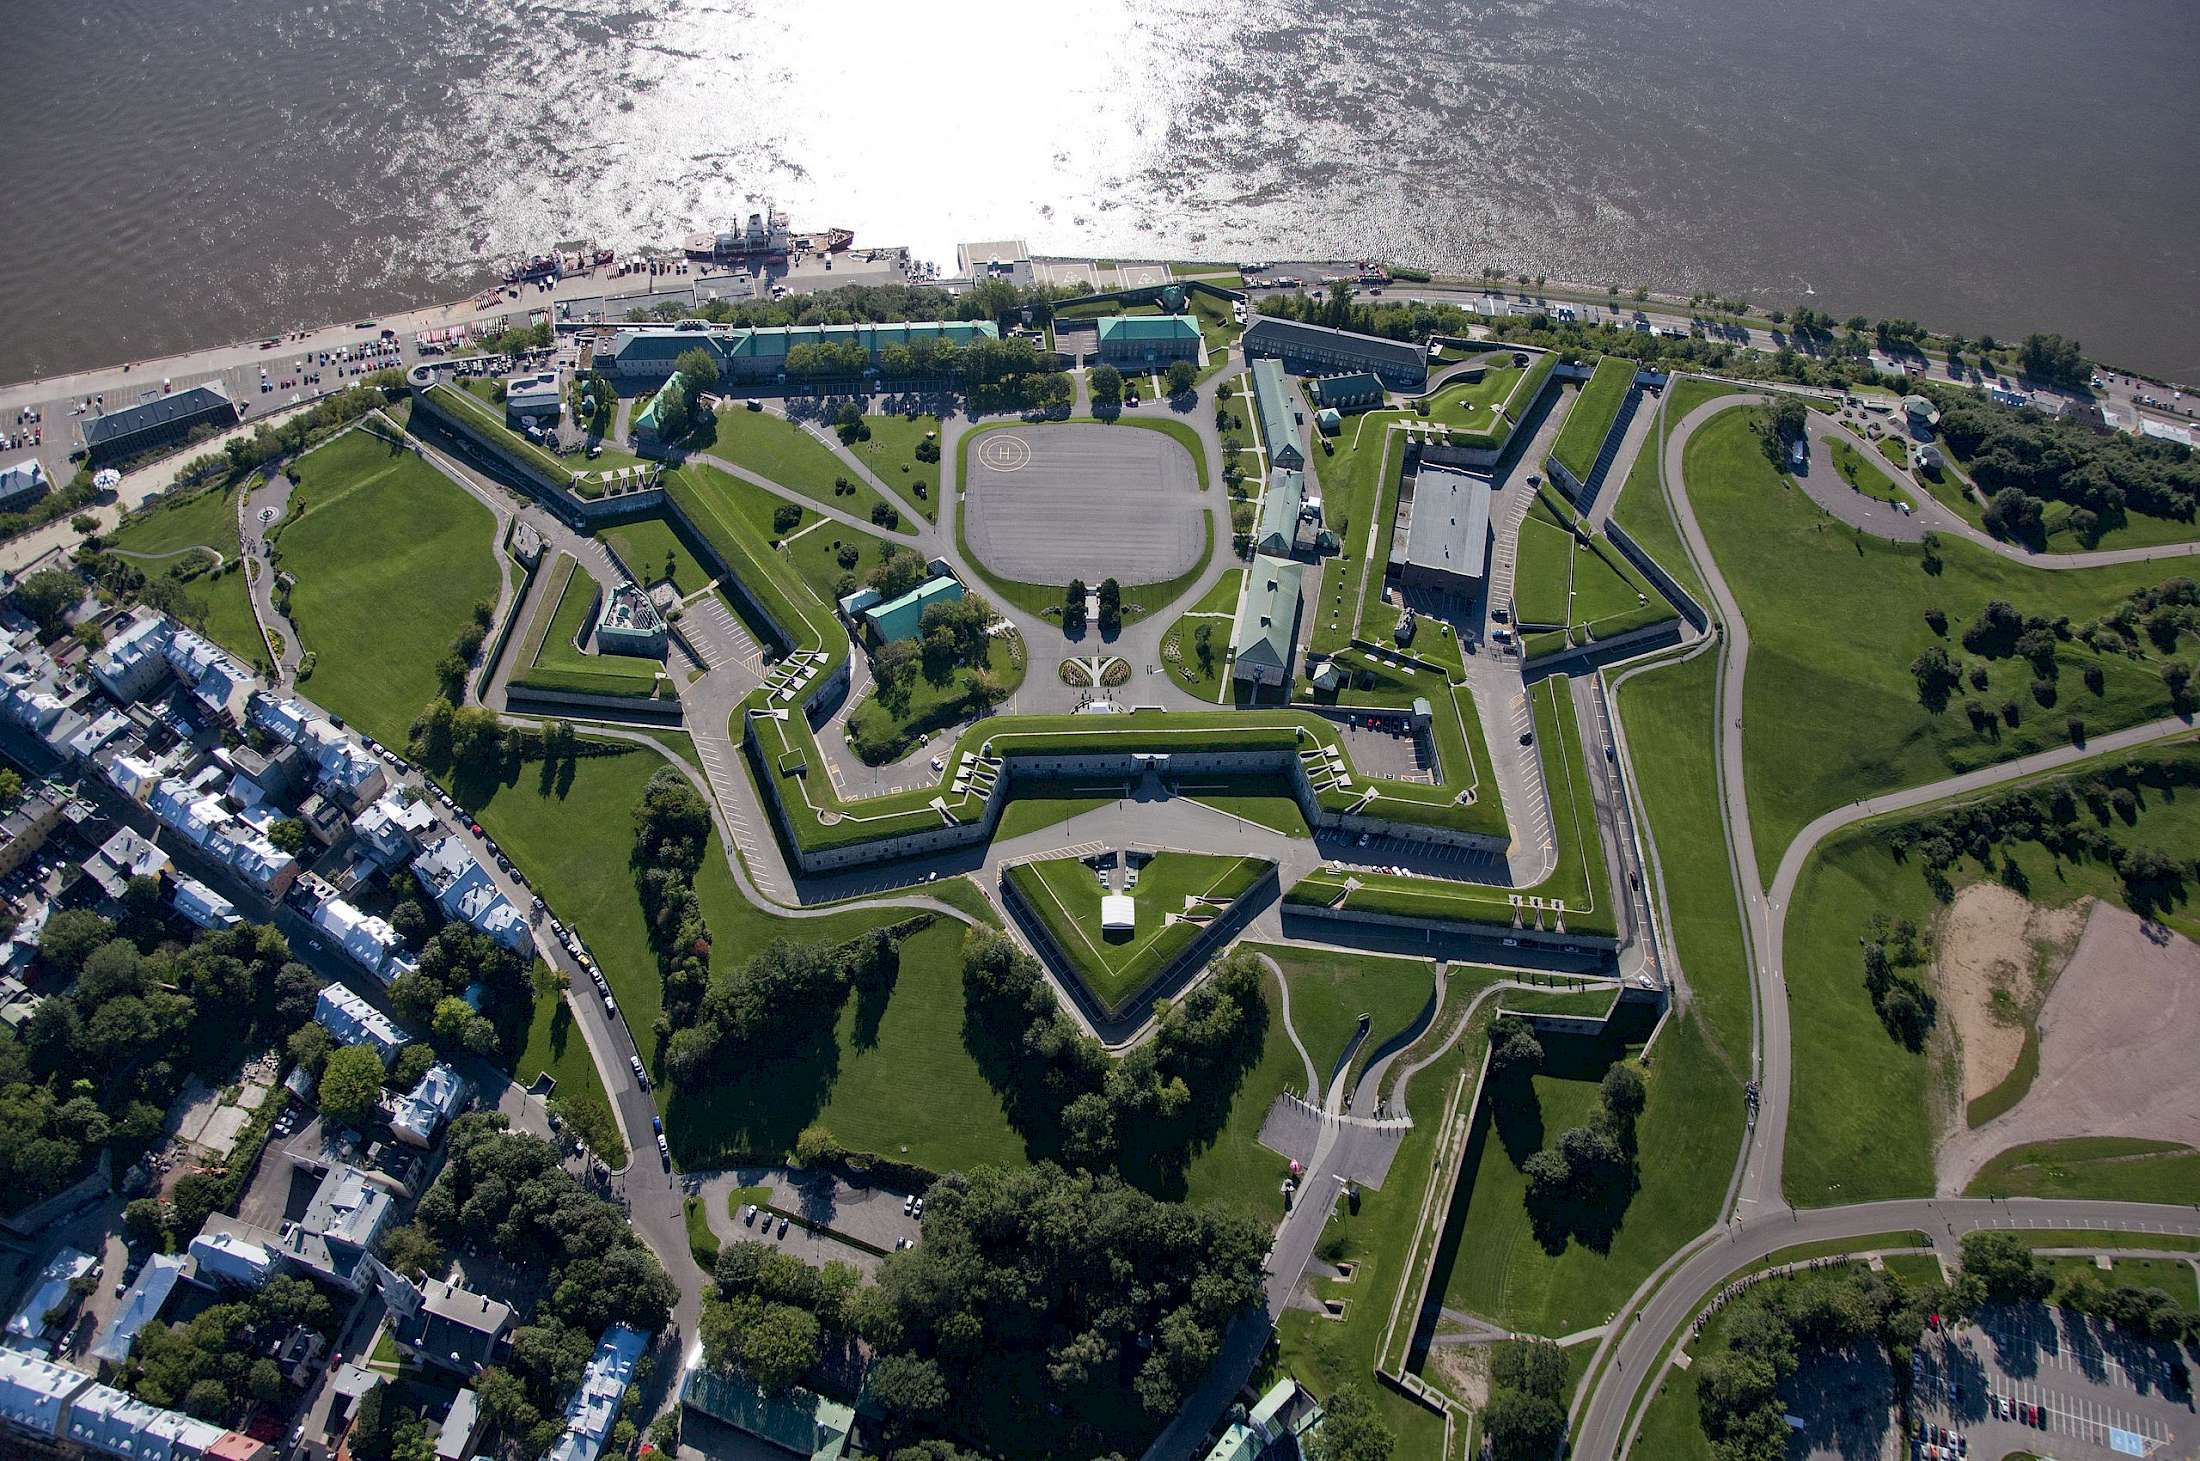 'La Citadelle' is an active military installation and the secondary official residence of both the Canadian monarch and the governor general of Canada.